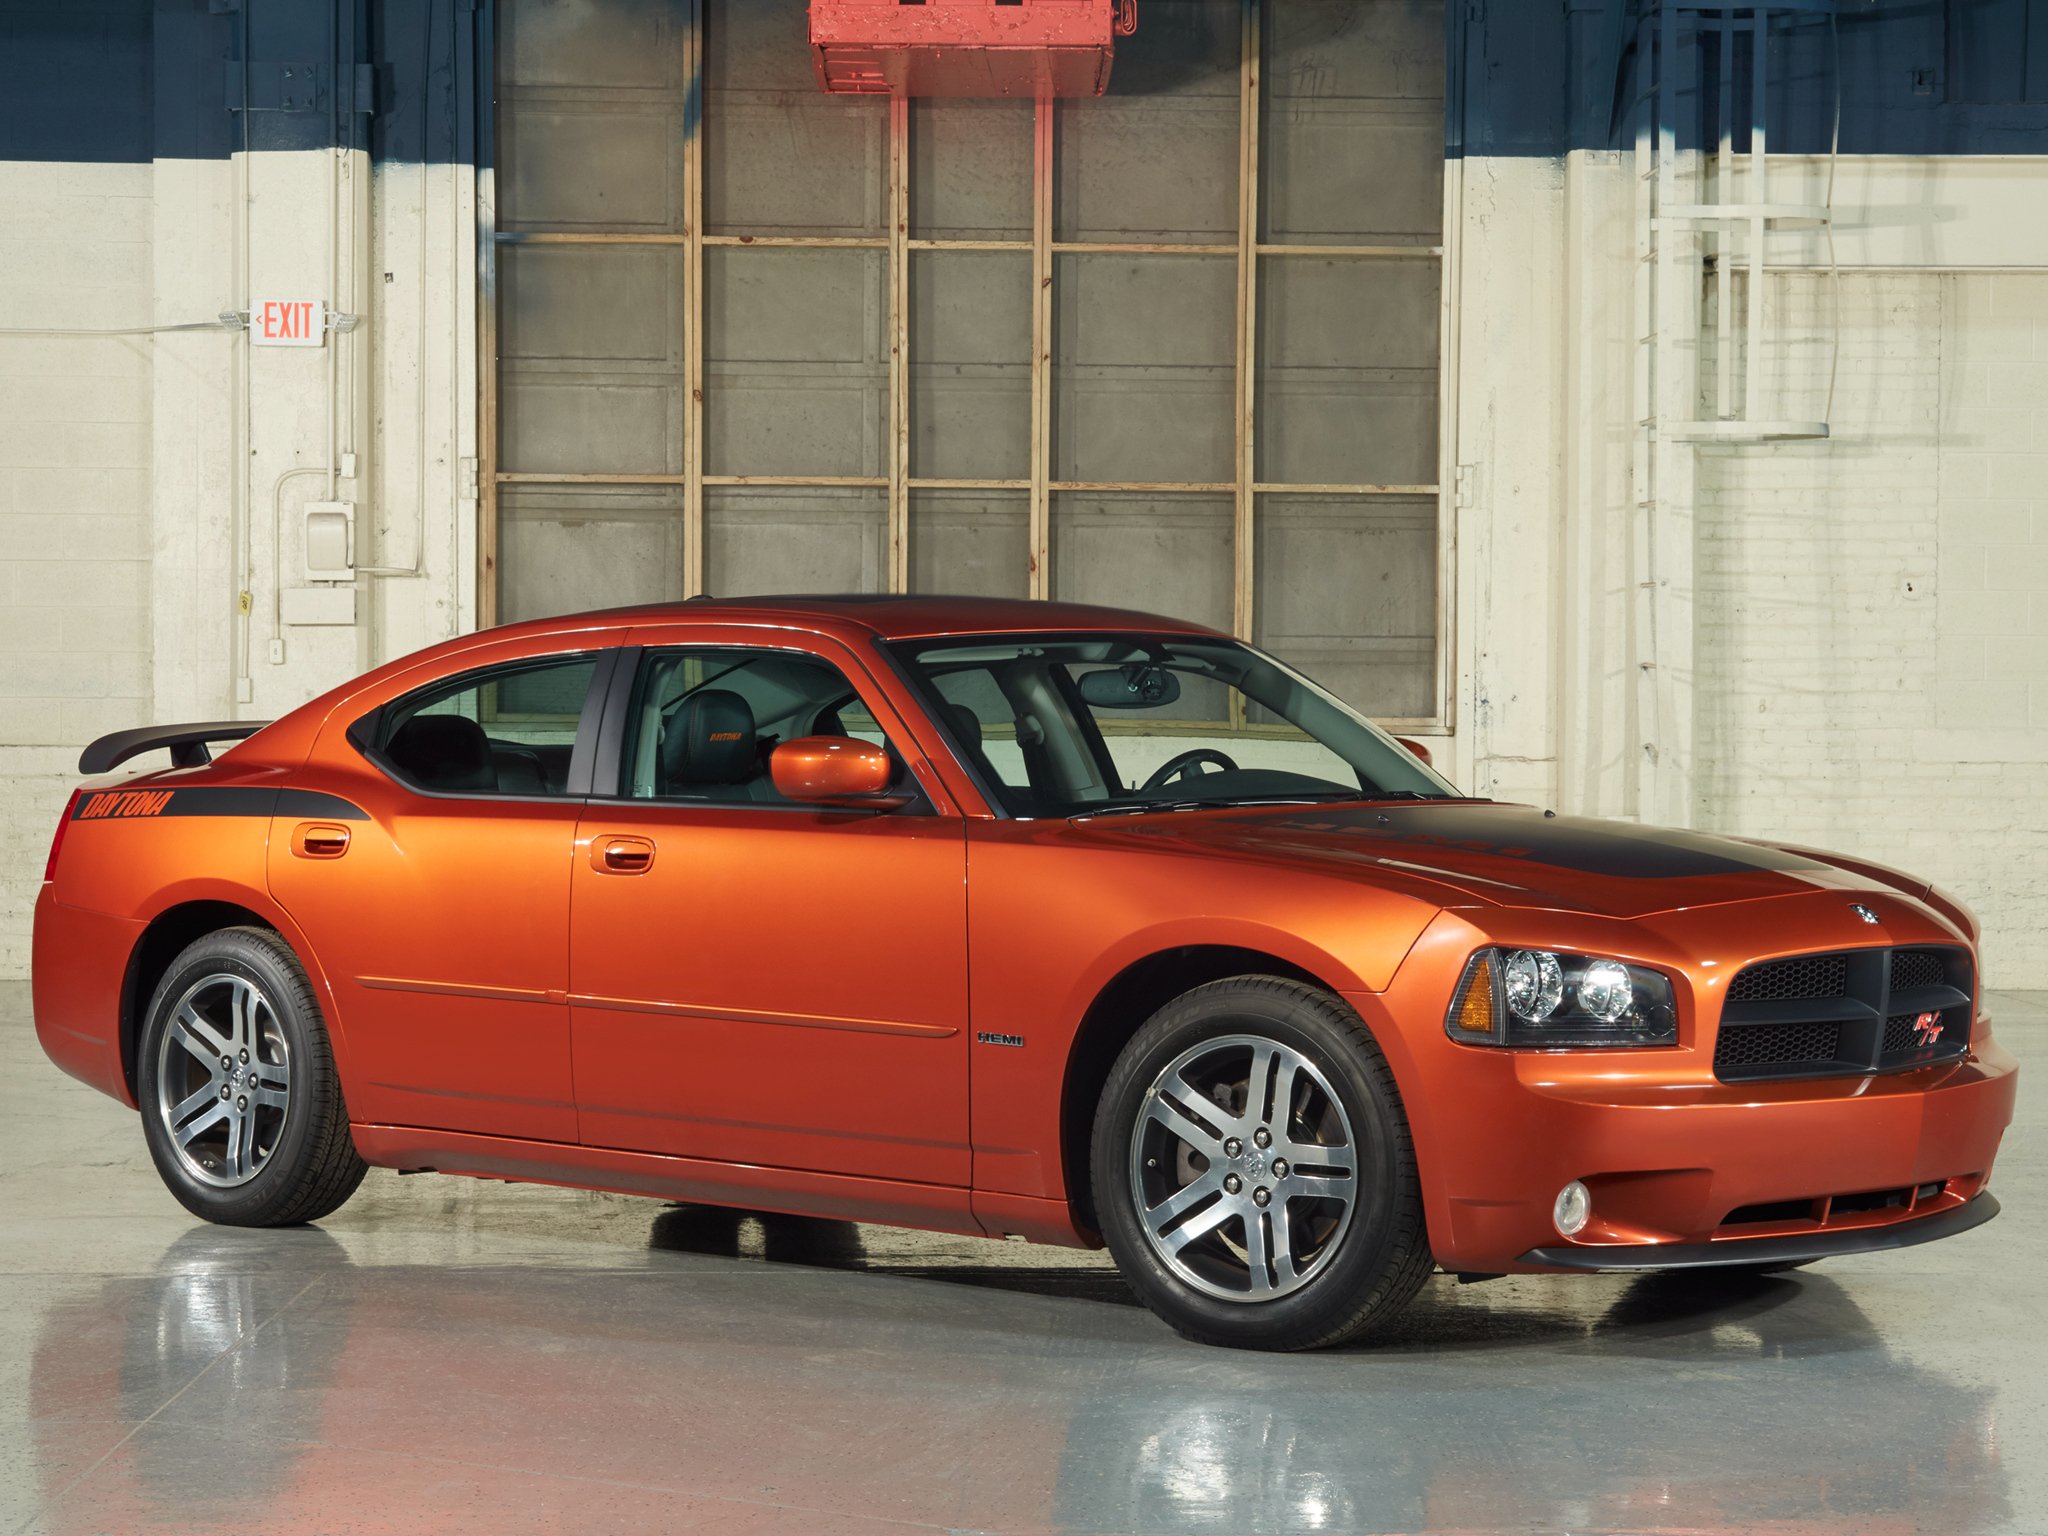 2006 09, Dodge, Charger, R,  t, Daytona,  lx , Muscle, Re Wallpaper